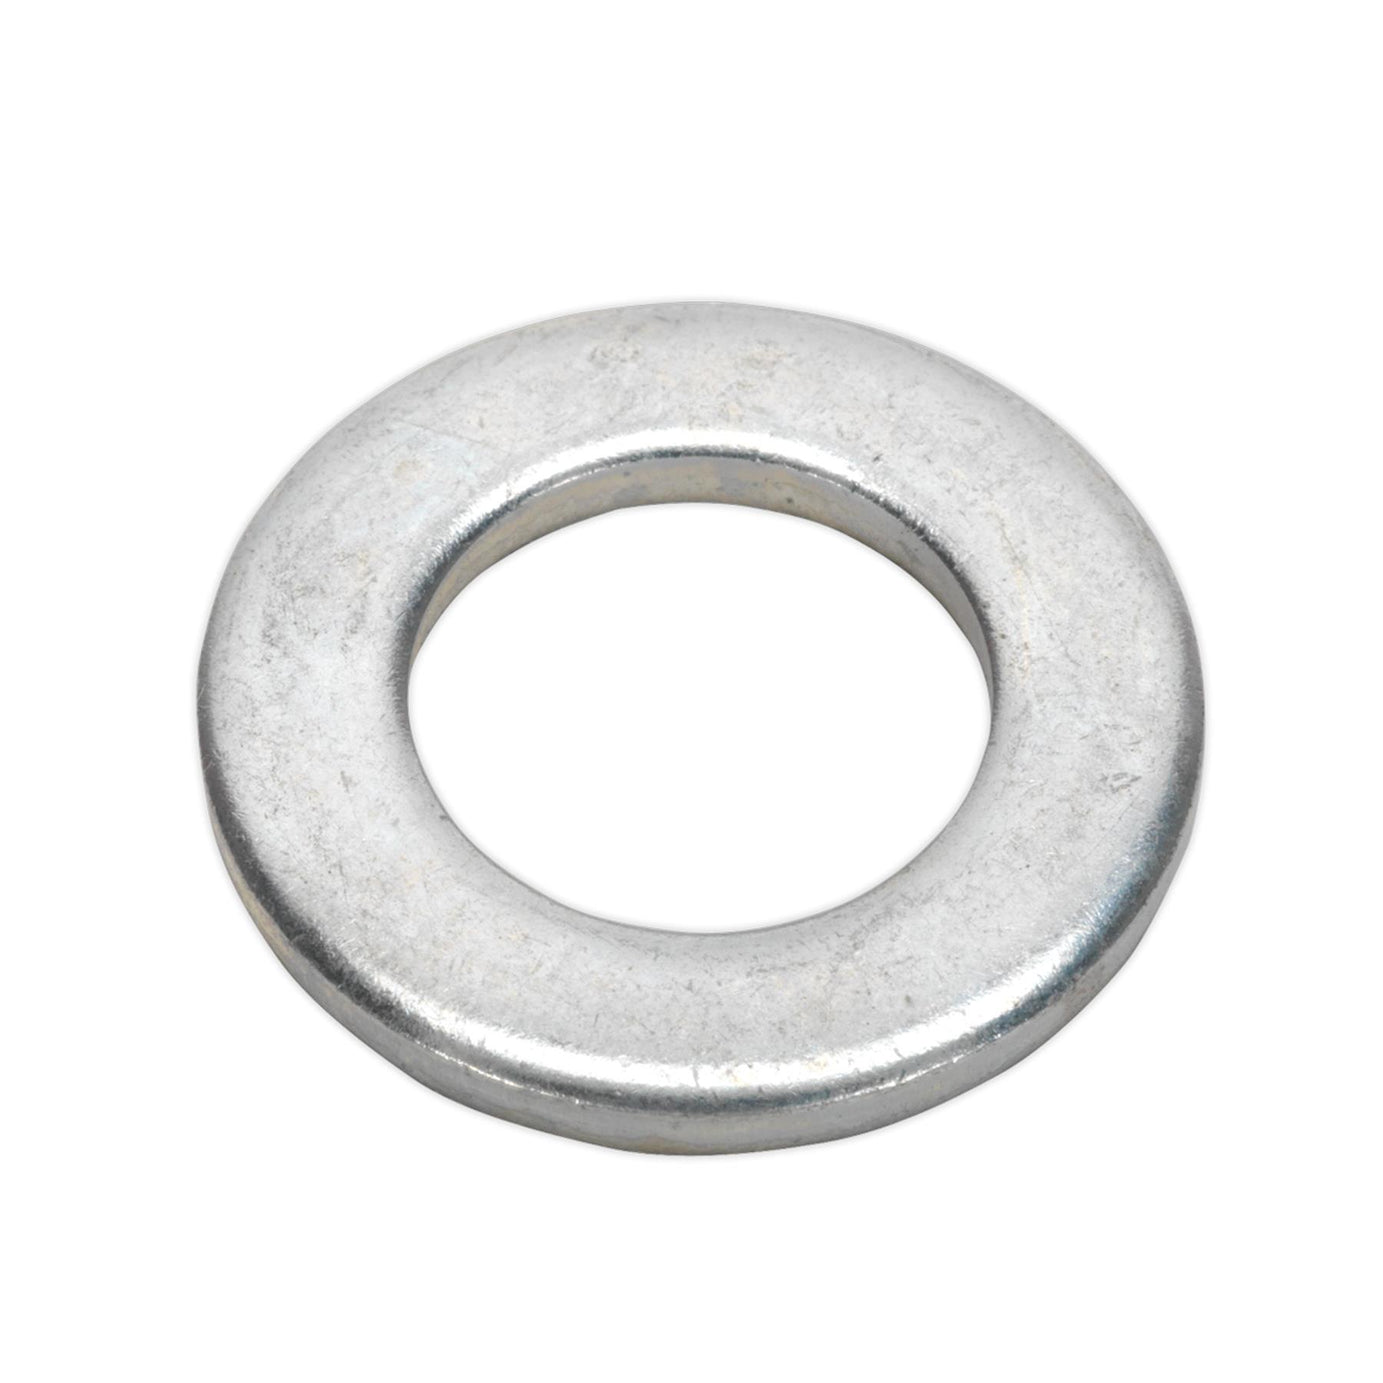 Sealey Flat Washer DIN 125 M16 x 30mm Form A Zinc Pack of 50